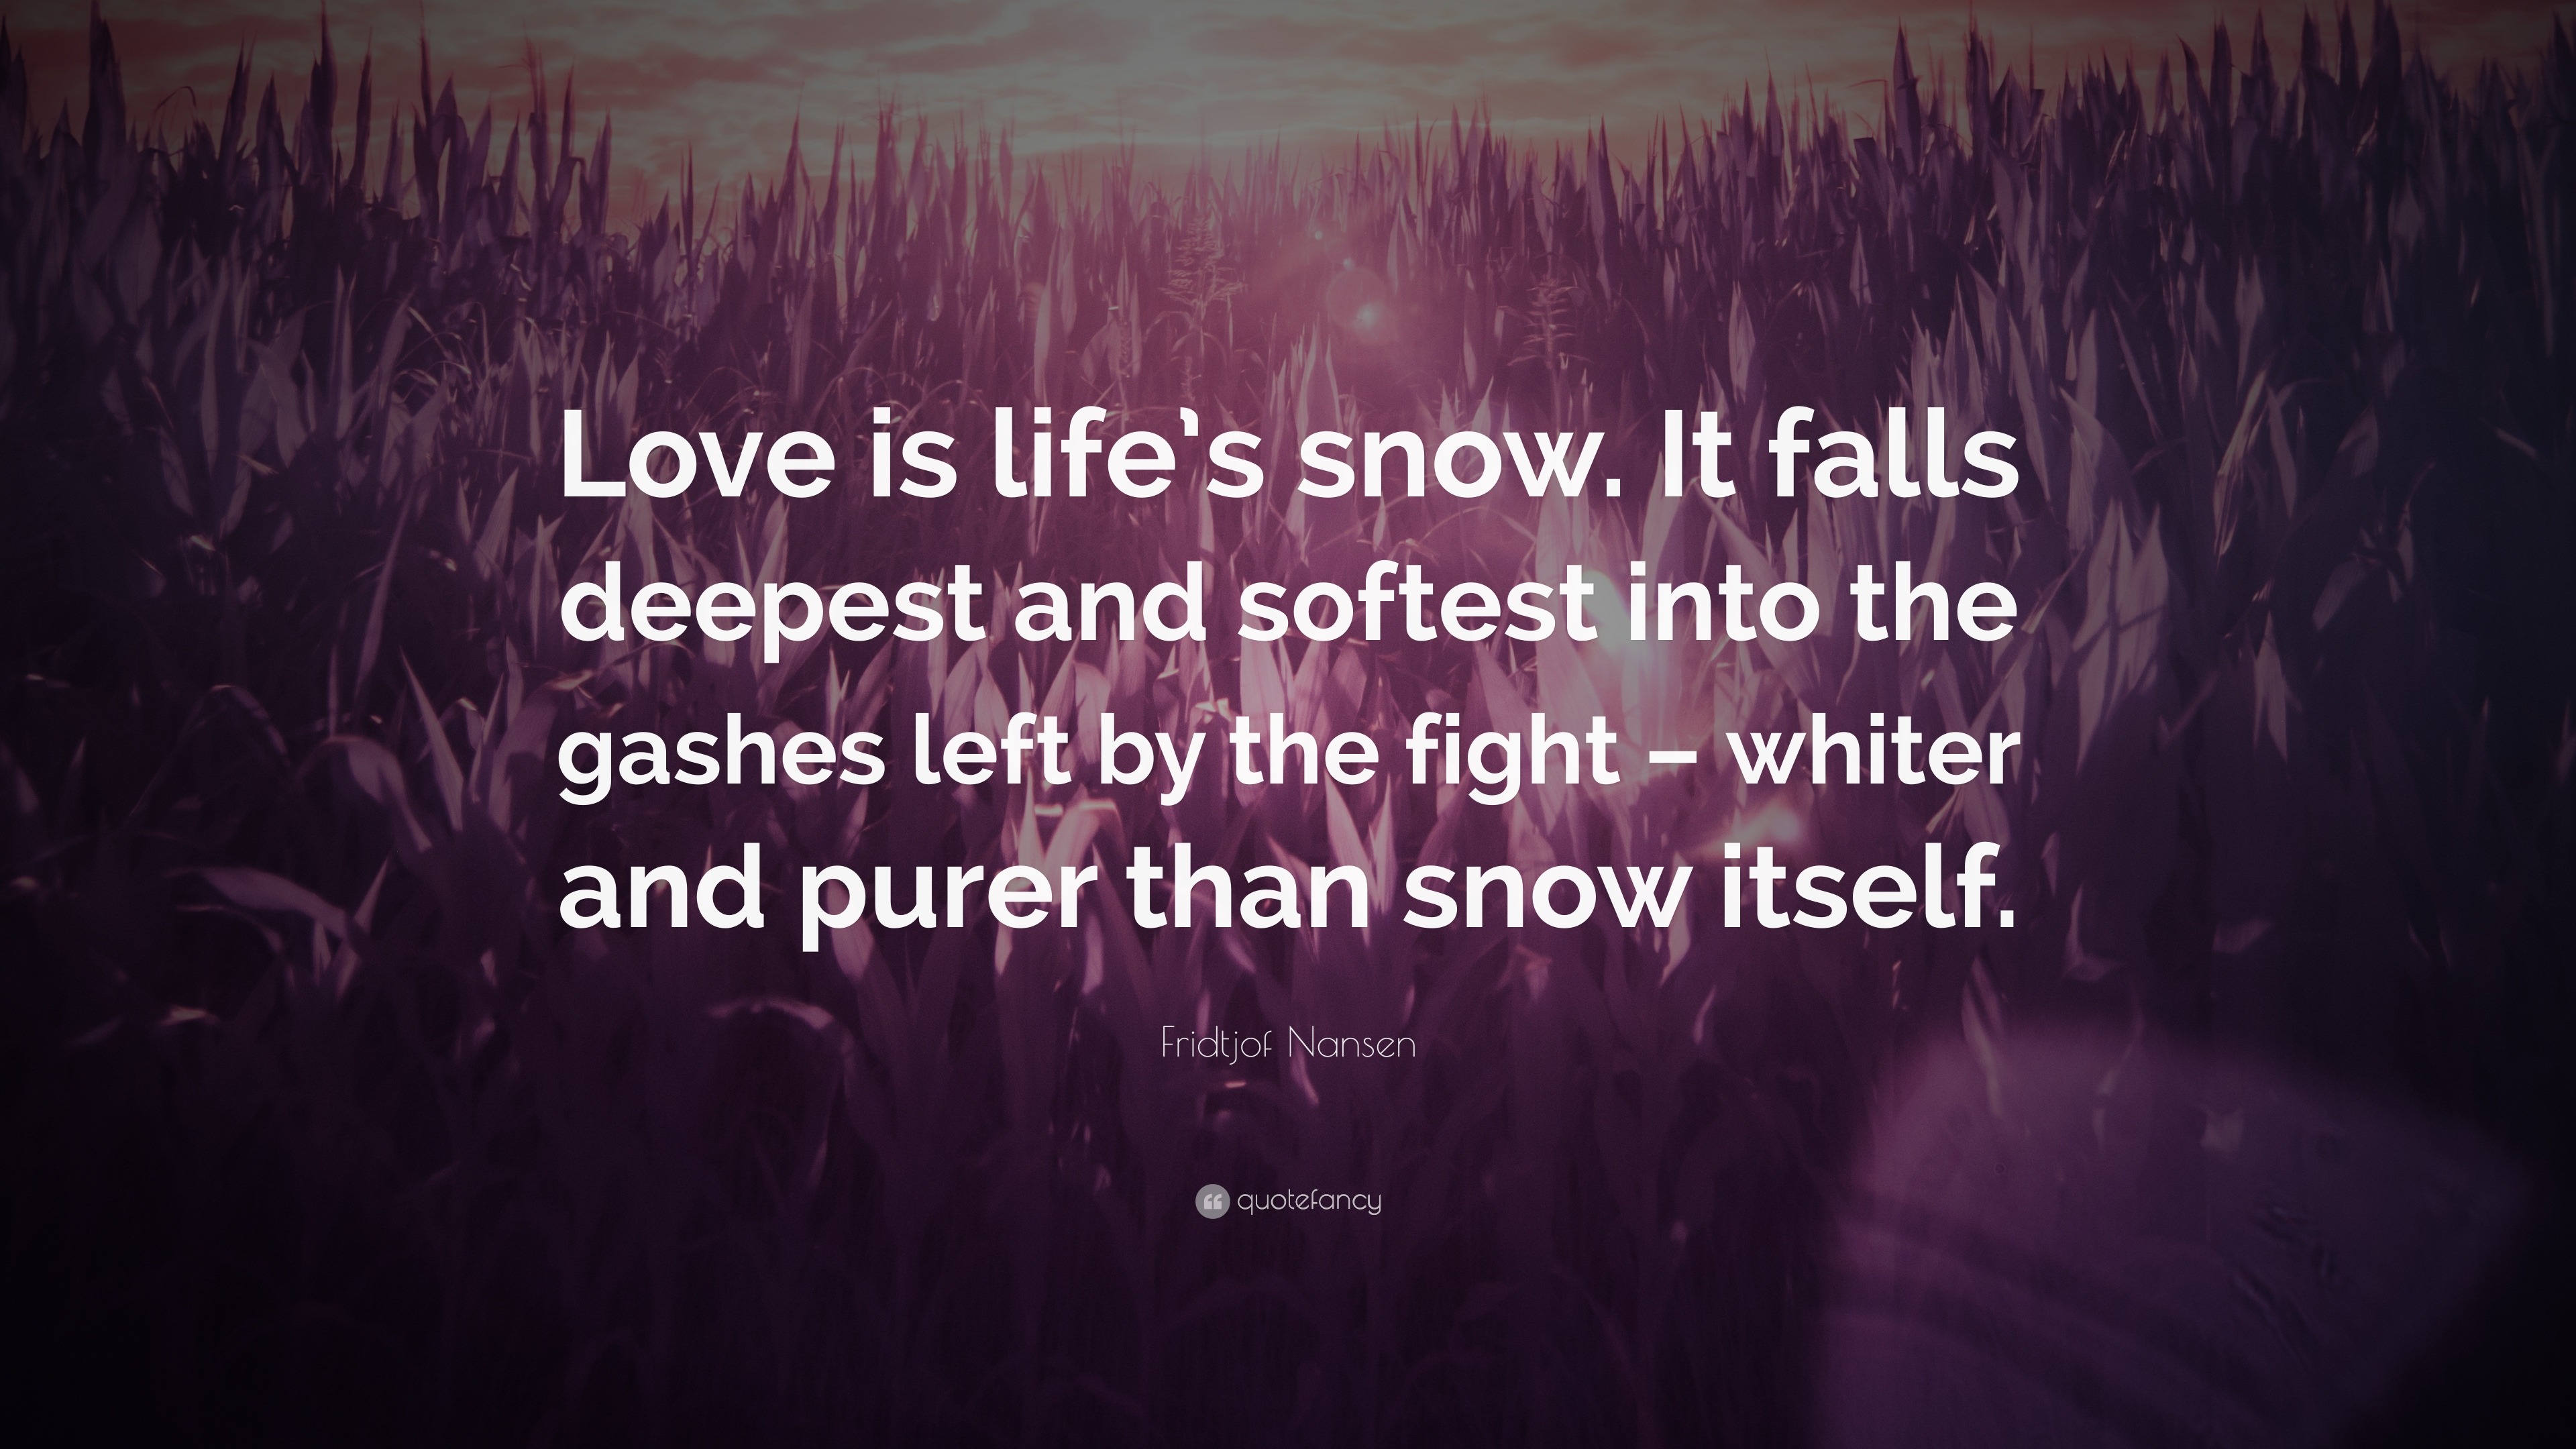 Fridtjof Nansen Quote “Love is life s snow It falls deepest and softest into